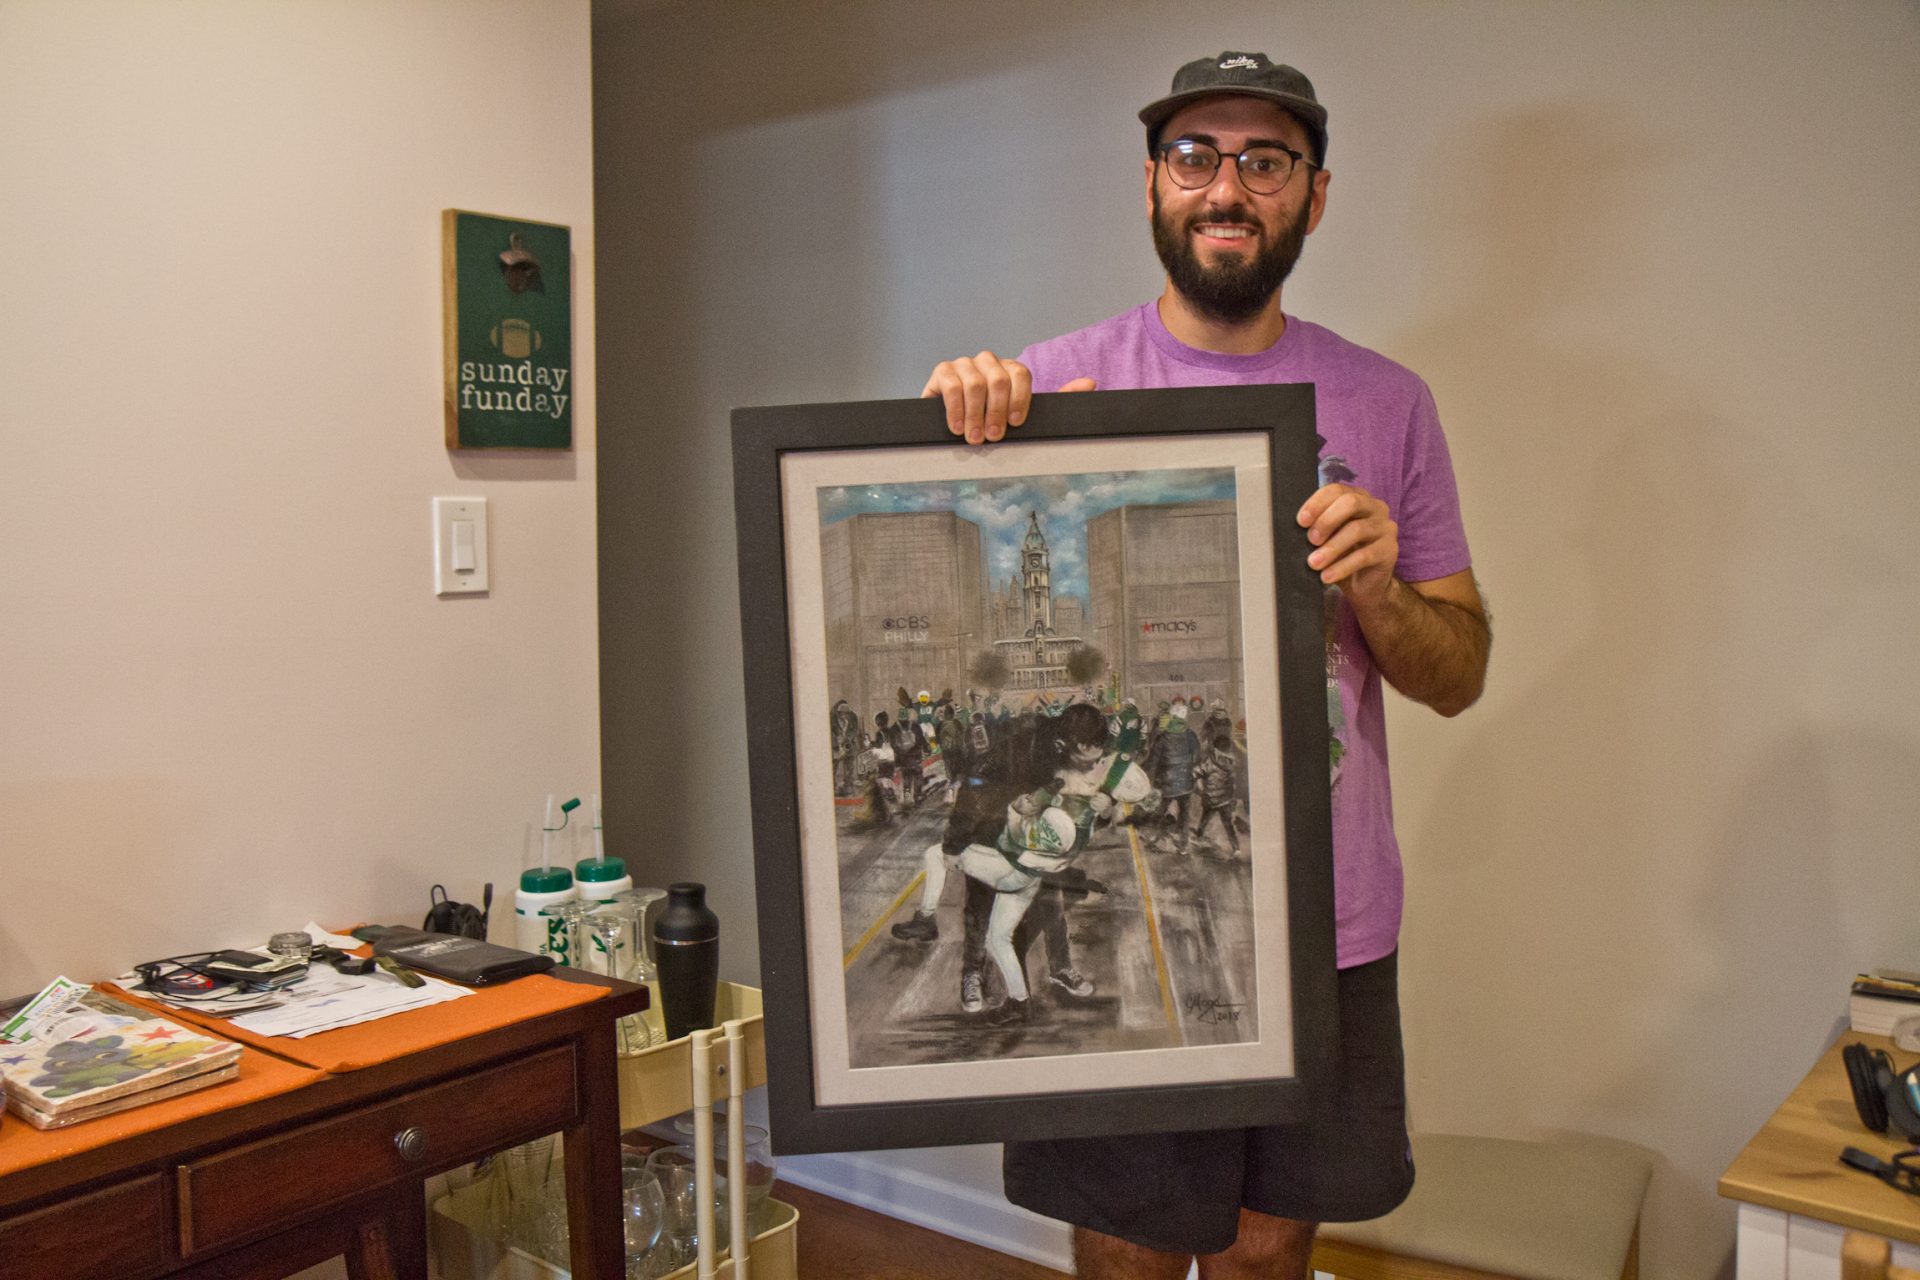 Shamus Clancy, a Philadelphia writer and sports super fan, holds a drawing recreation of a photo taken on the day of the Eagles Super Bowl parade, where a tweet set in motion the kiss that introduced Clancy to his girlfriend. 